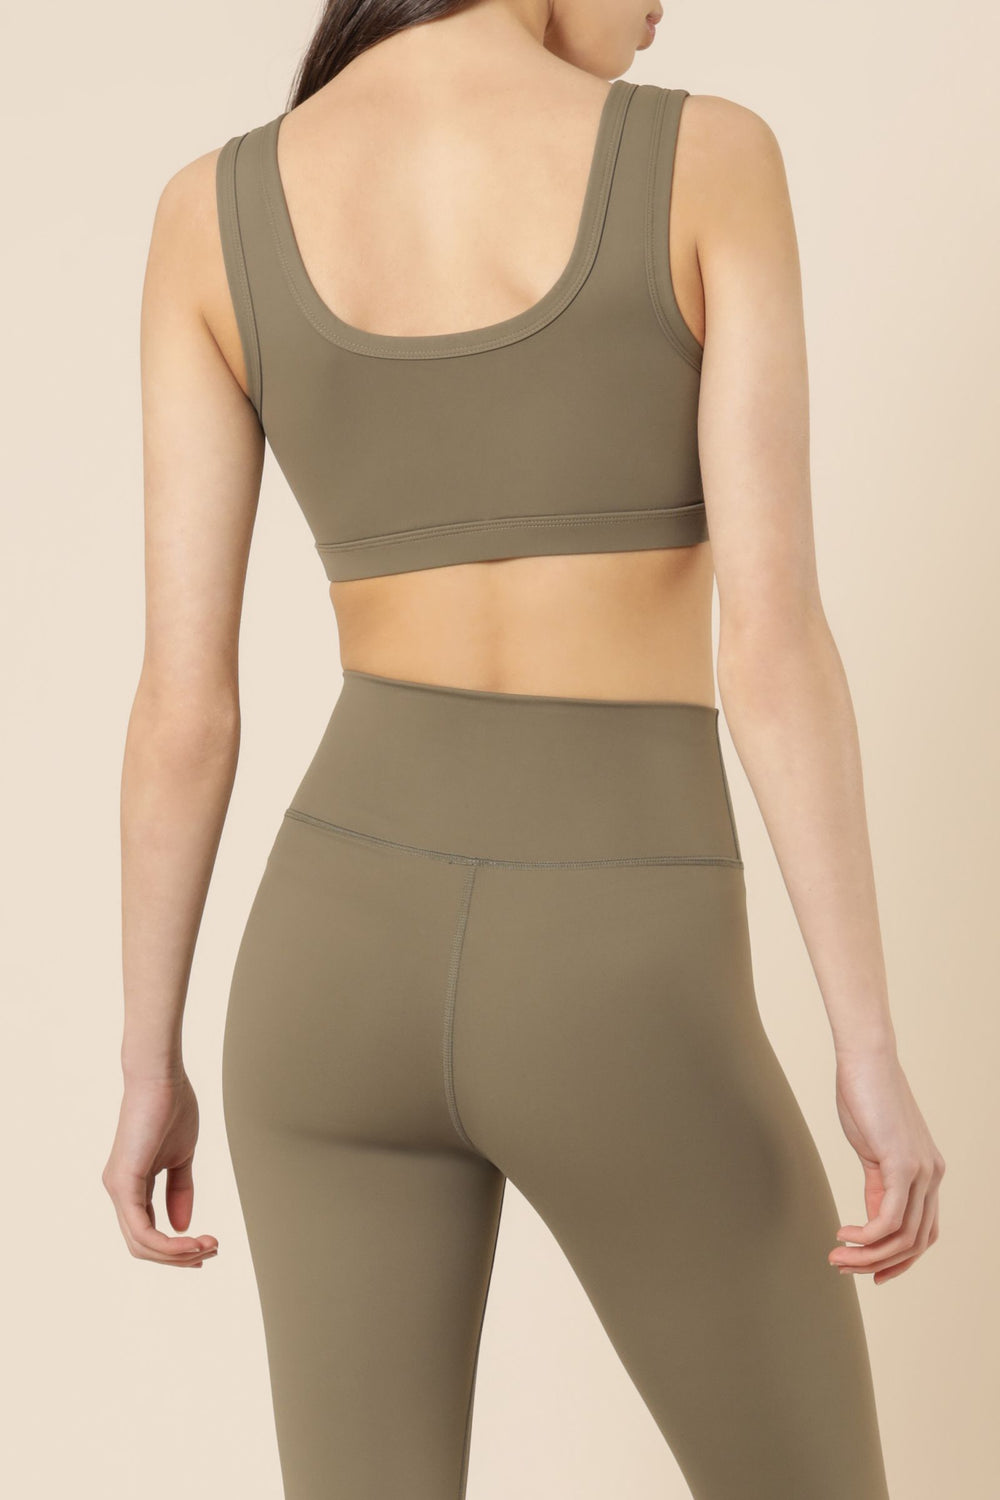 Nude Lucy Active 7/8 Tights Olive activewear nude lucy   